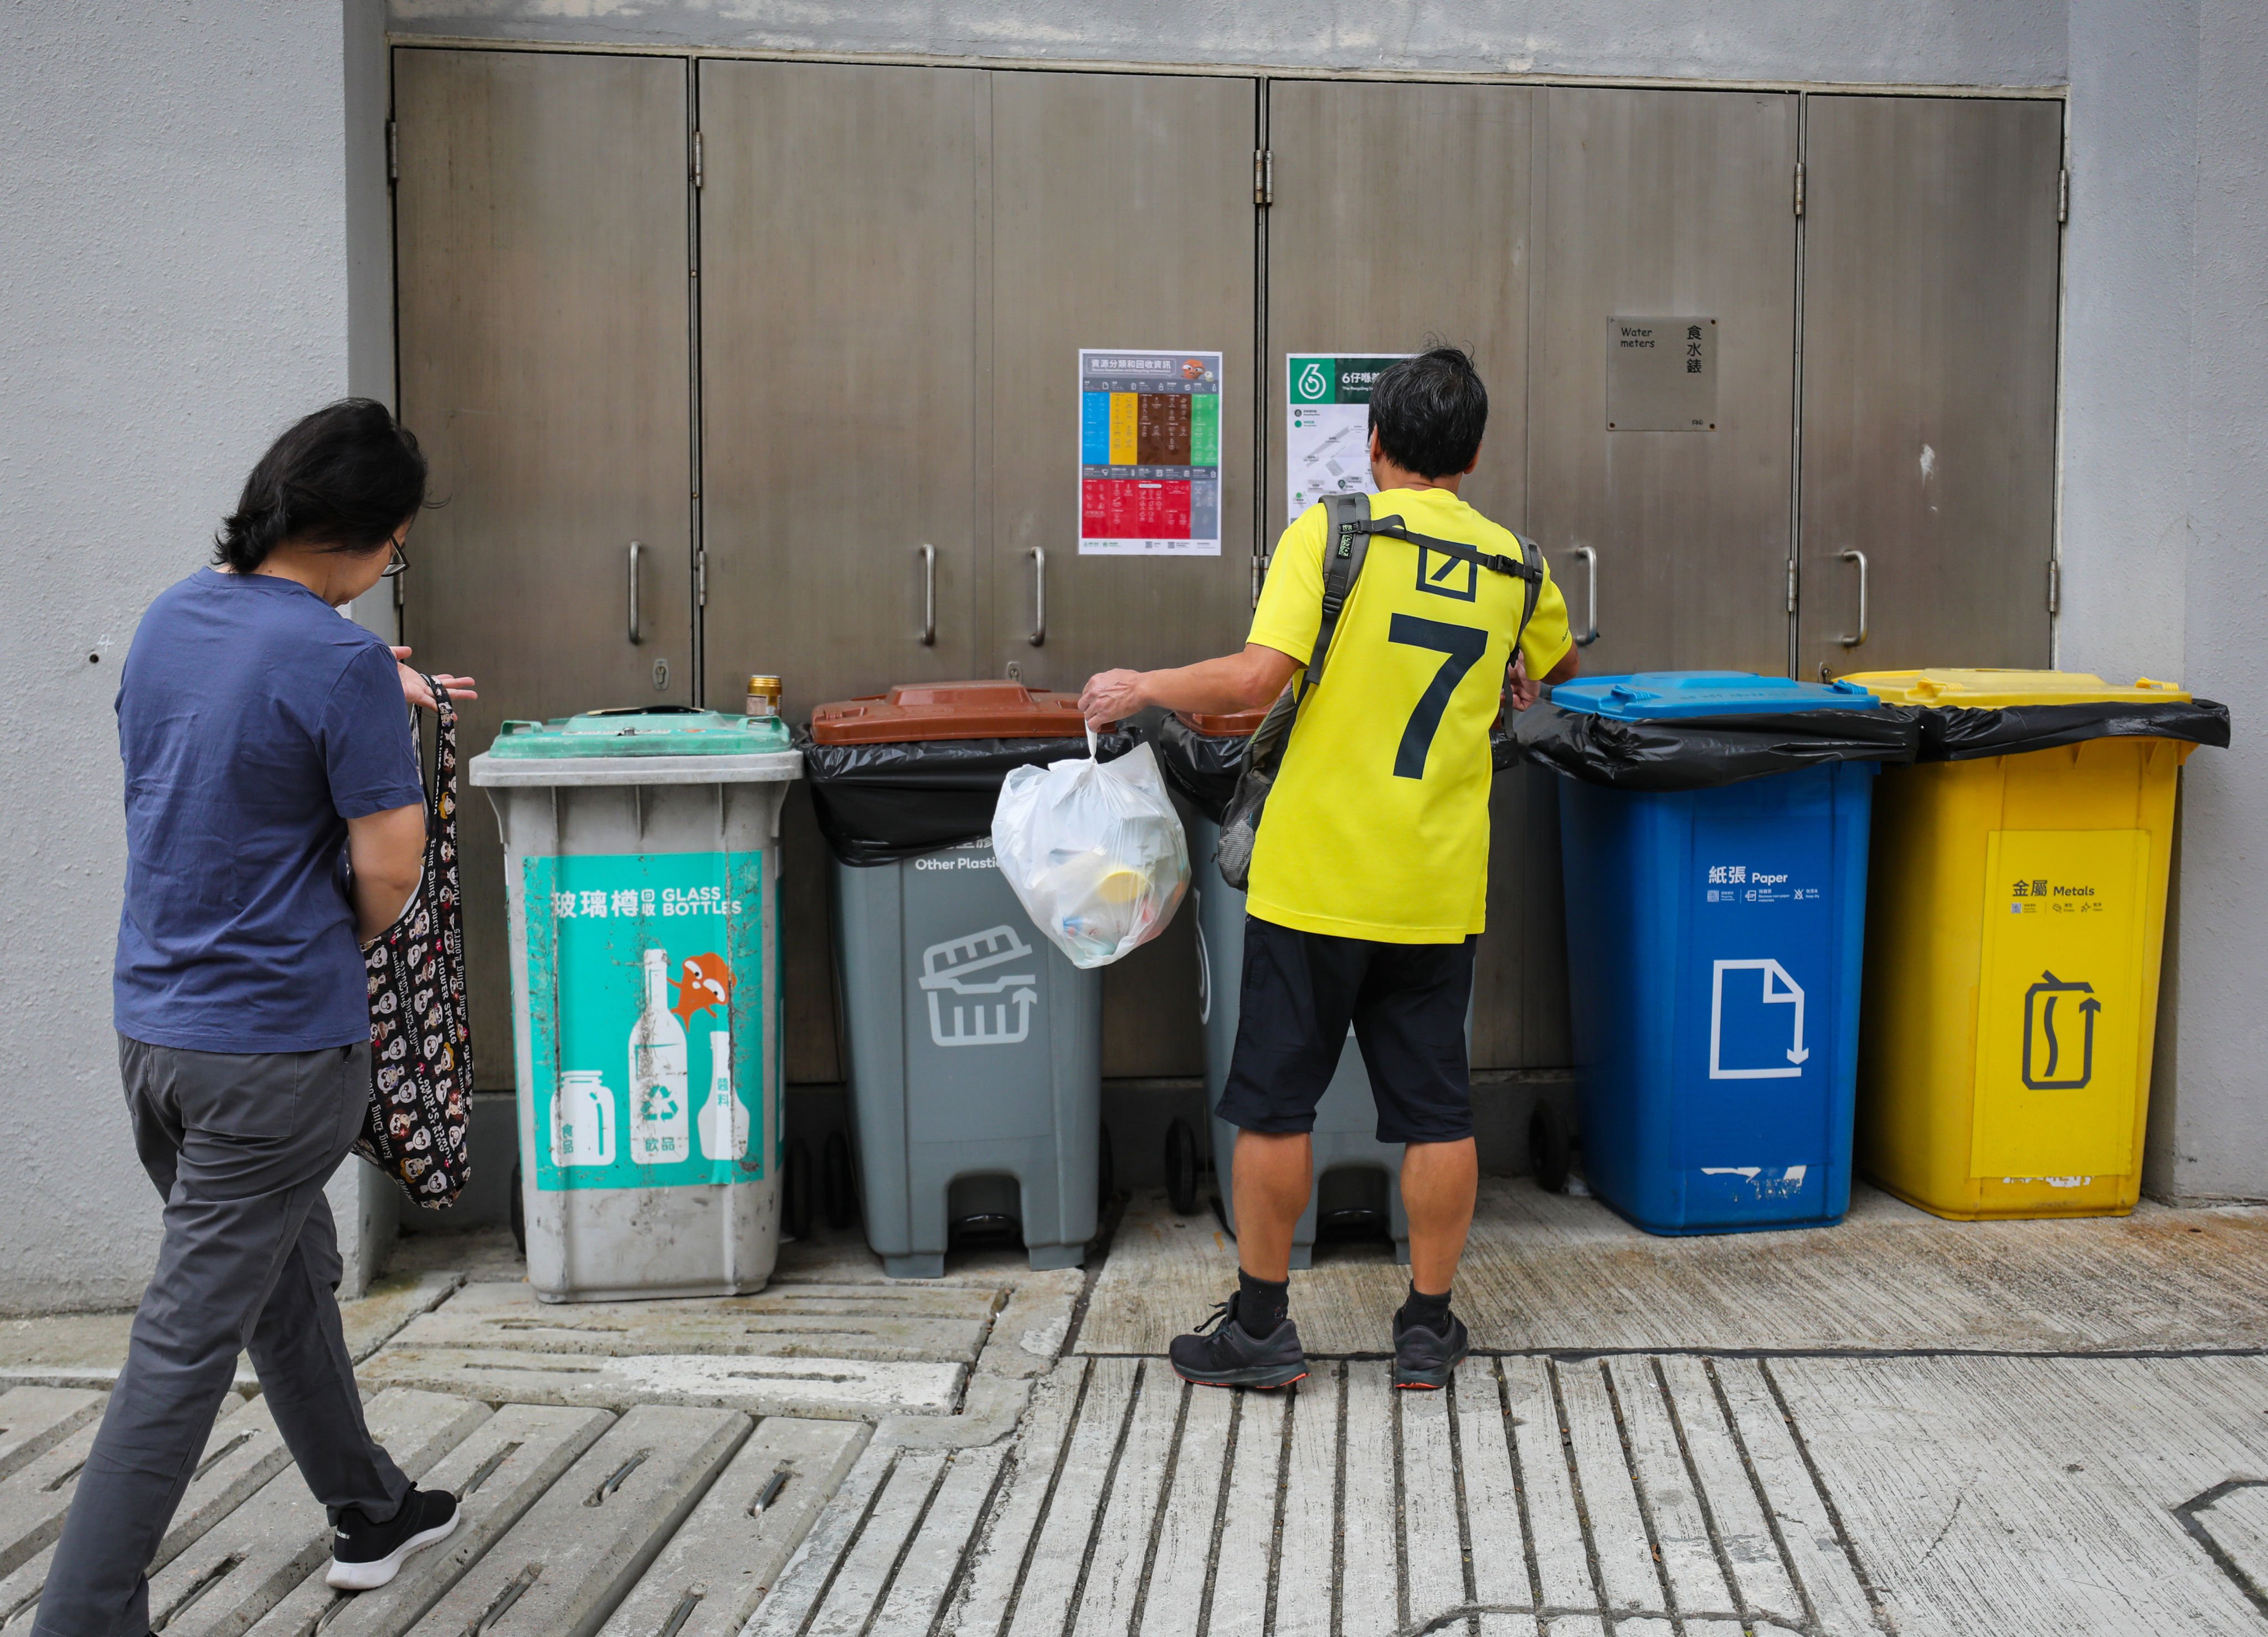 Hong Kong is pushing for more residents to recycle. Photo: Xiaomei Chen